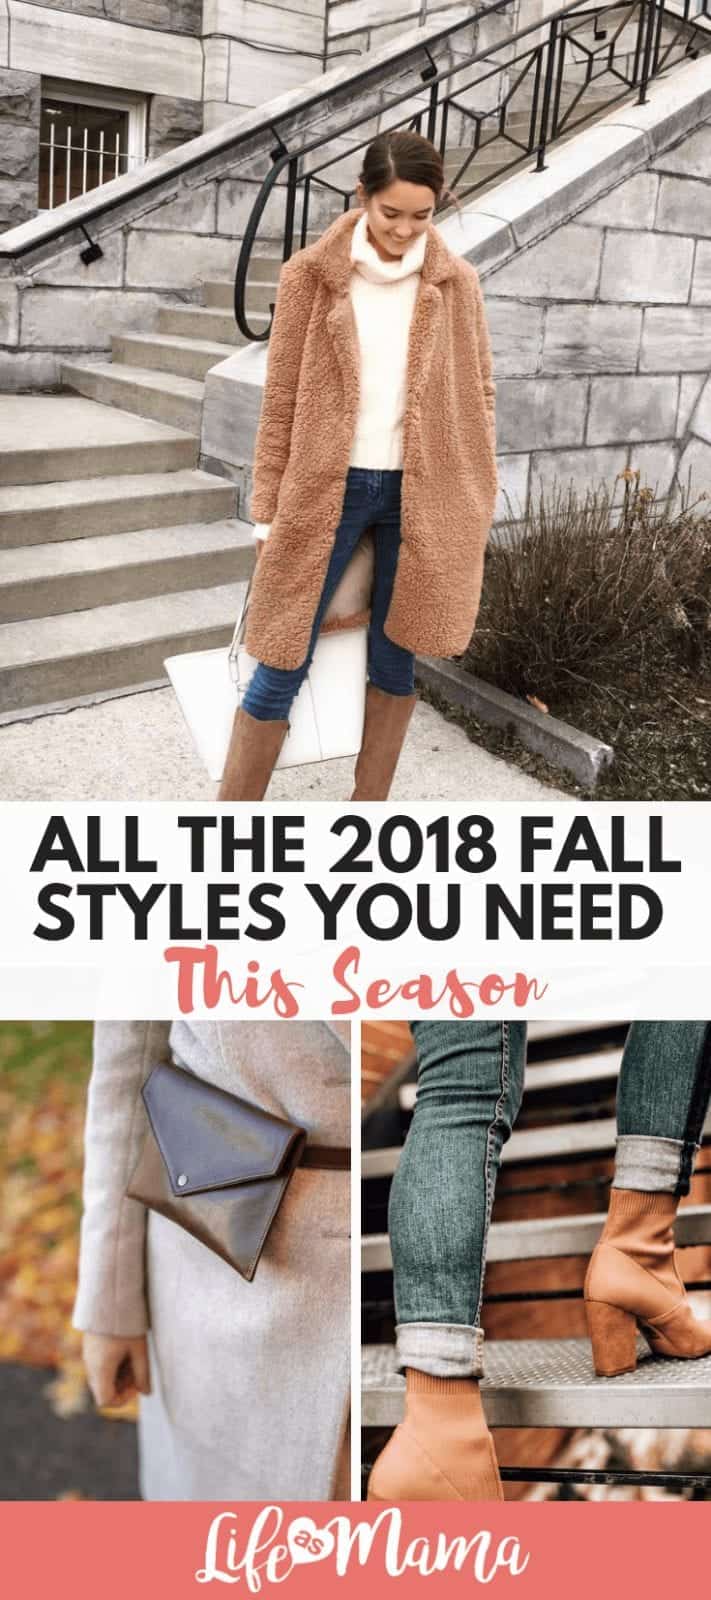 All the 2018 Fall Styles You Need This Season